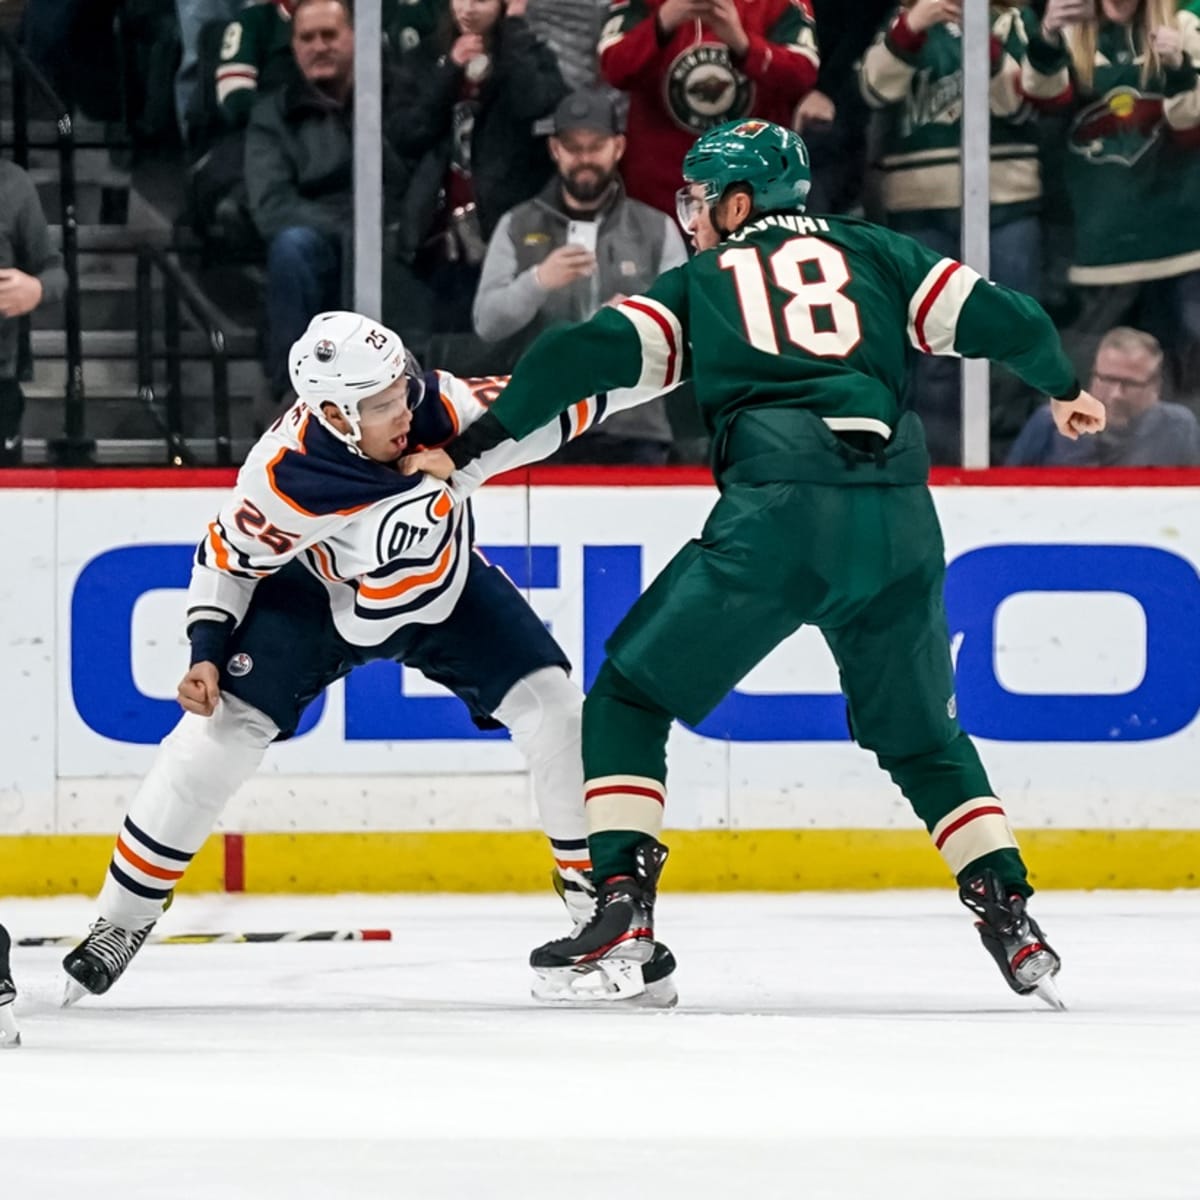 Jordan Greenway scores, assists and fights in Wild win over Oilers